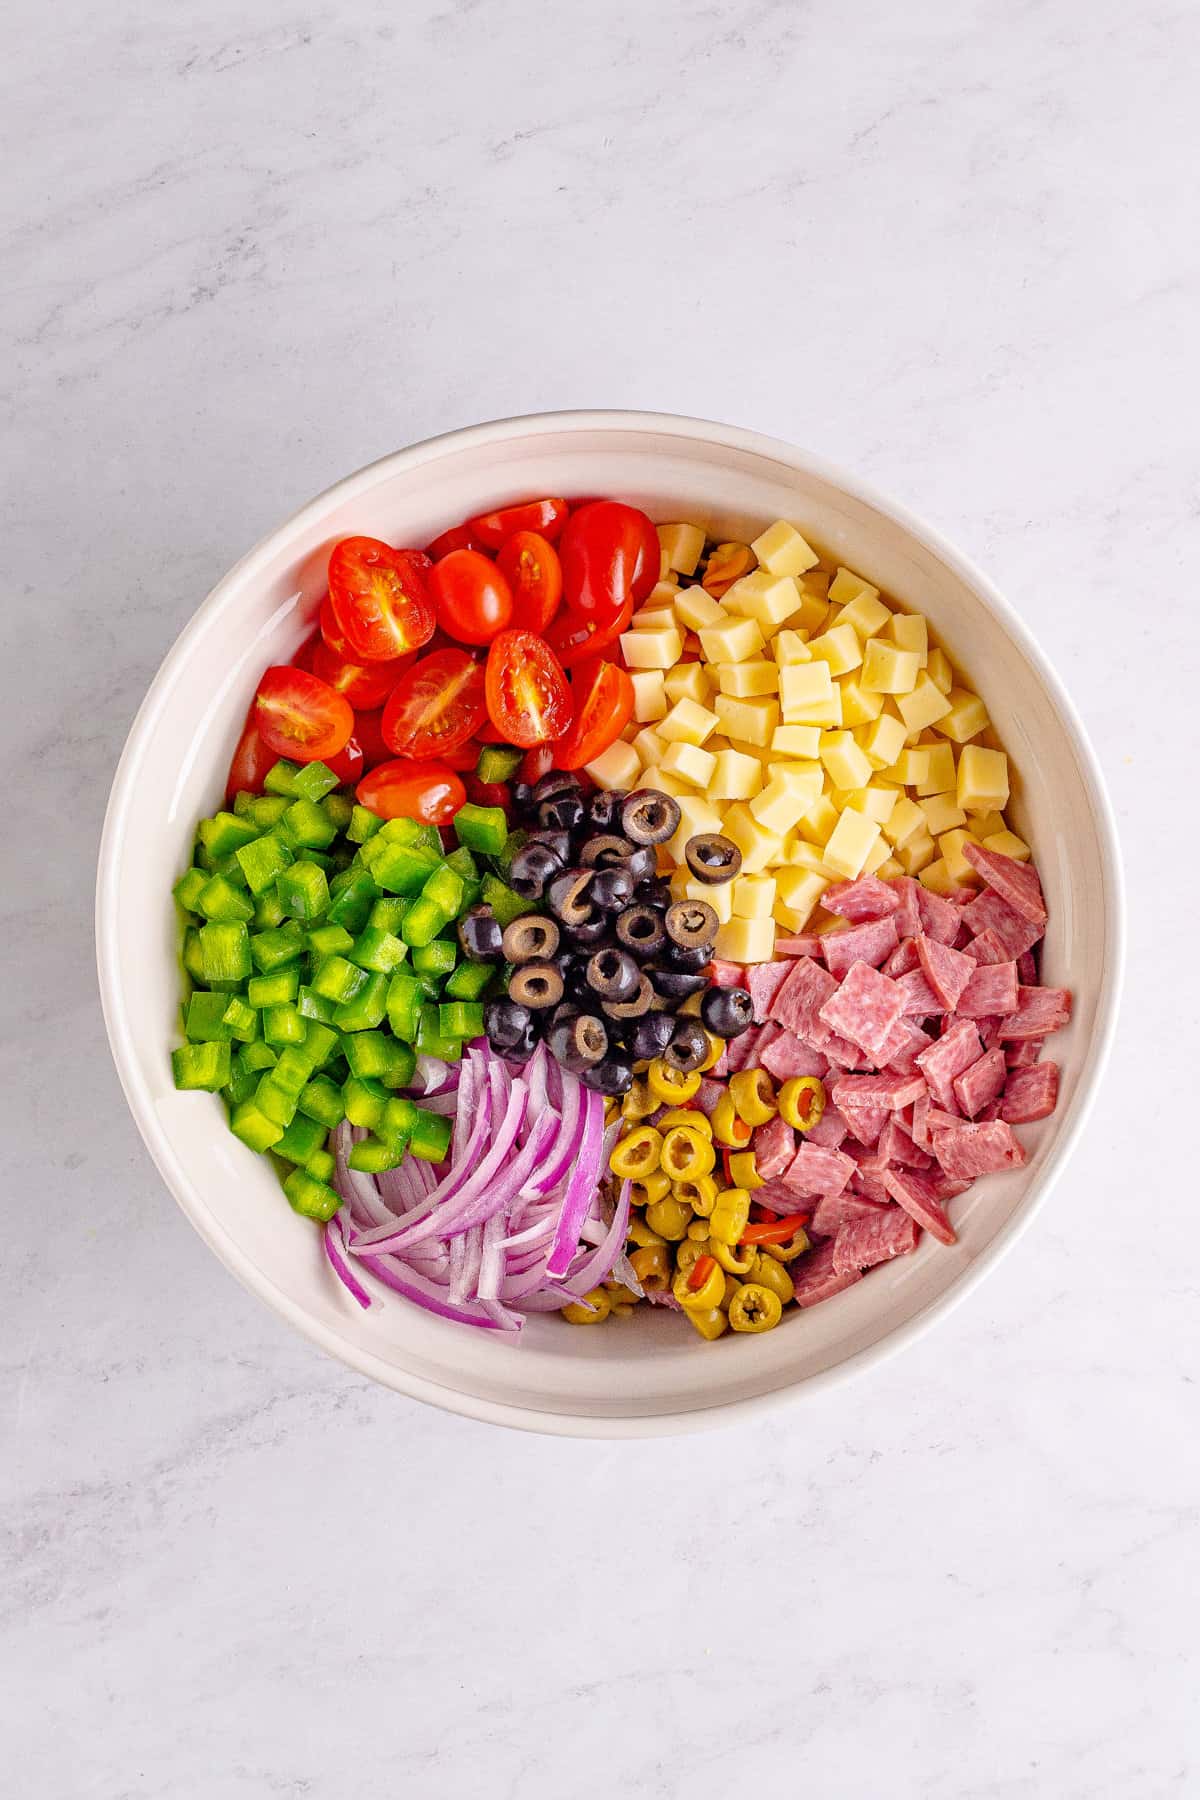 Large bowl with halved grape tomatoes, chopped green pepper, sliced red onion, sliced black and green olives, chopped salami, and cubed mozzarella cheese.